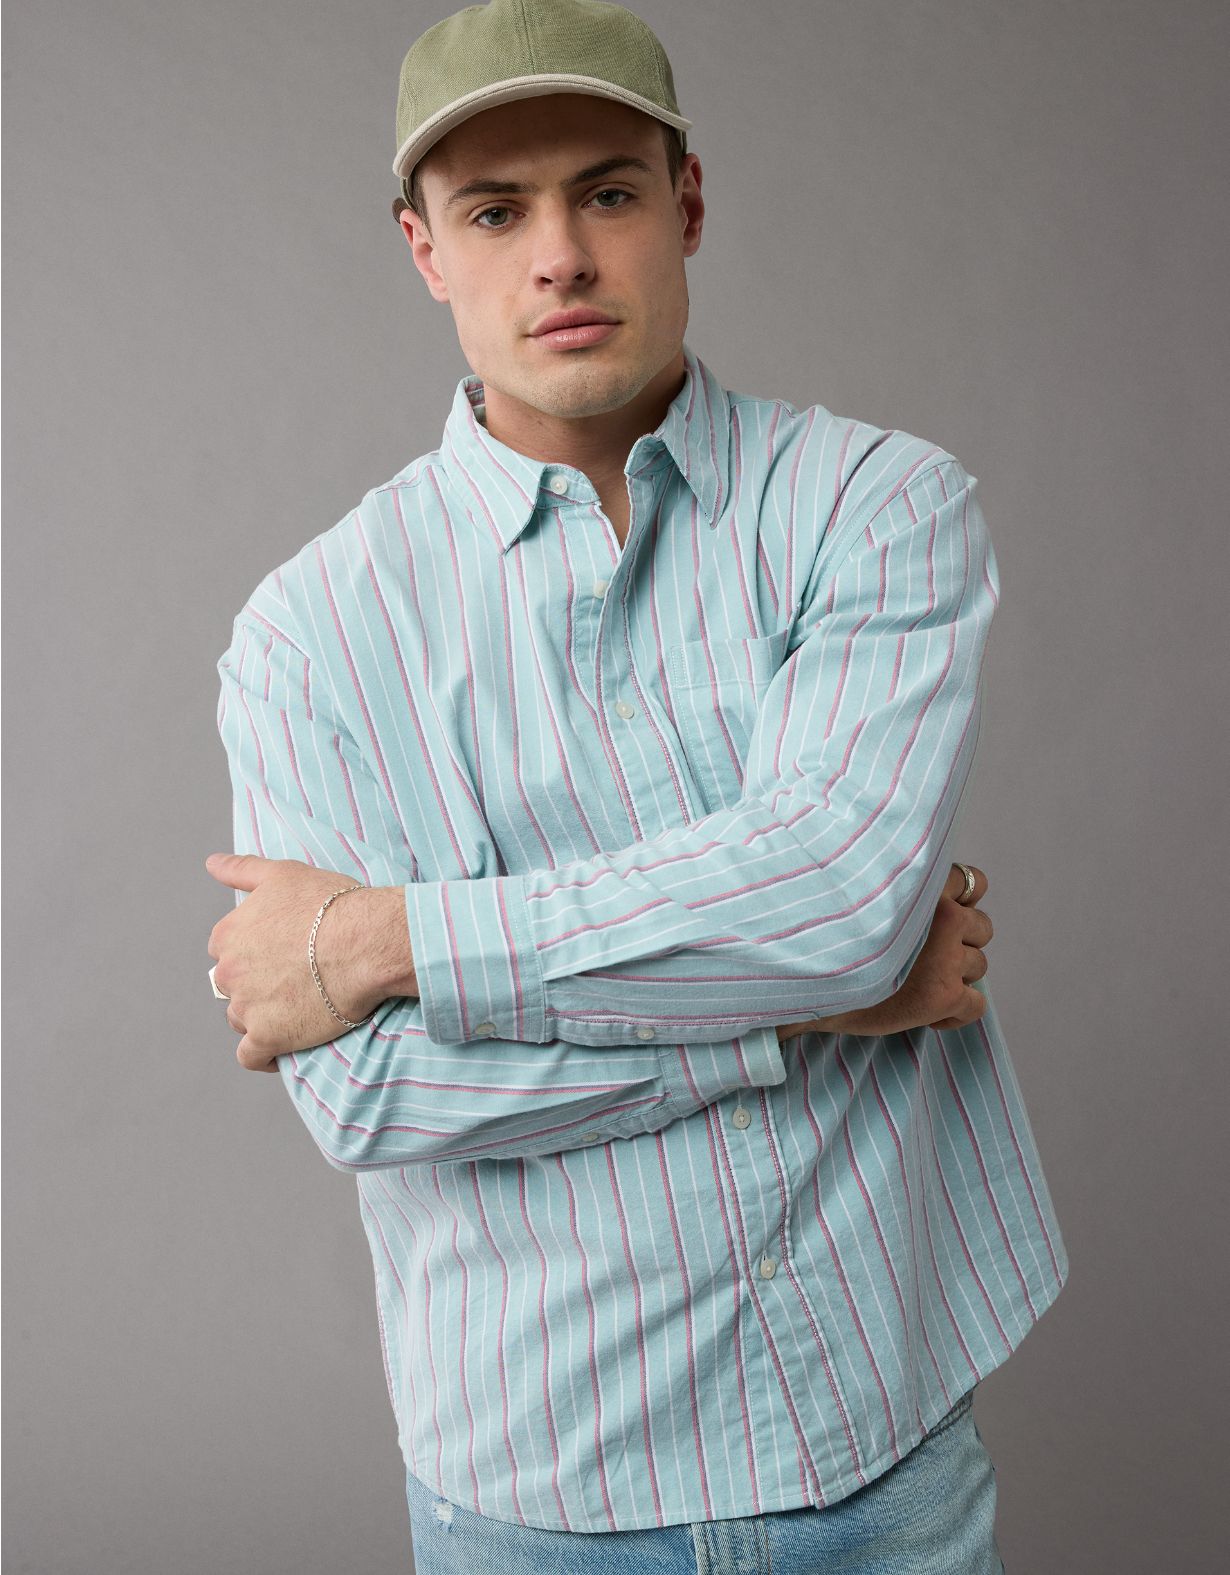 AE Everyday Relaxed Striped Oxford Button-Up Shirt